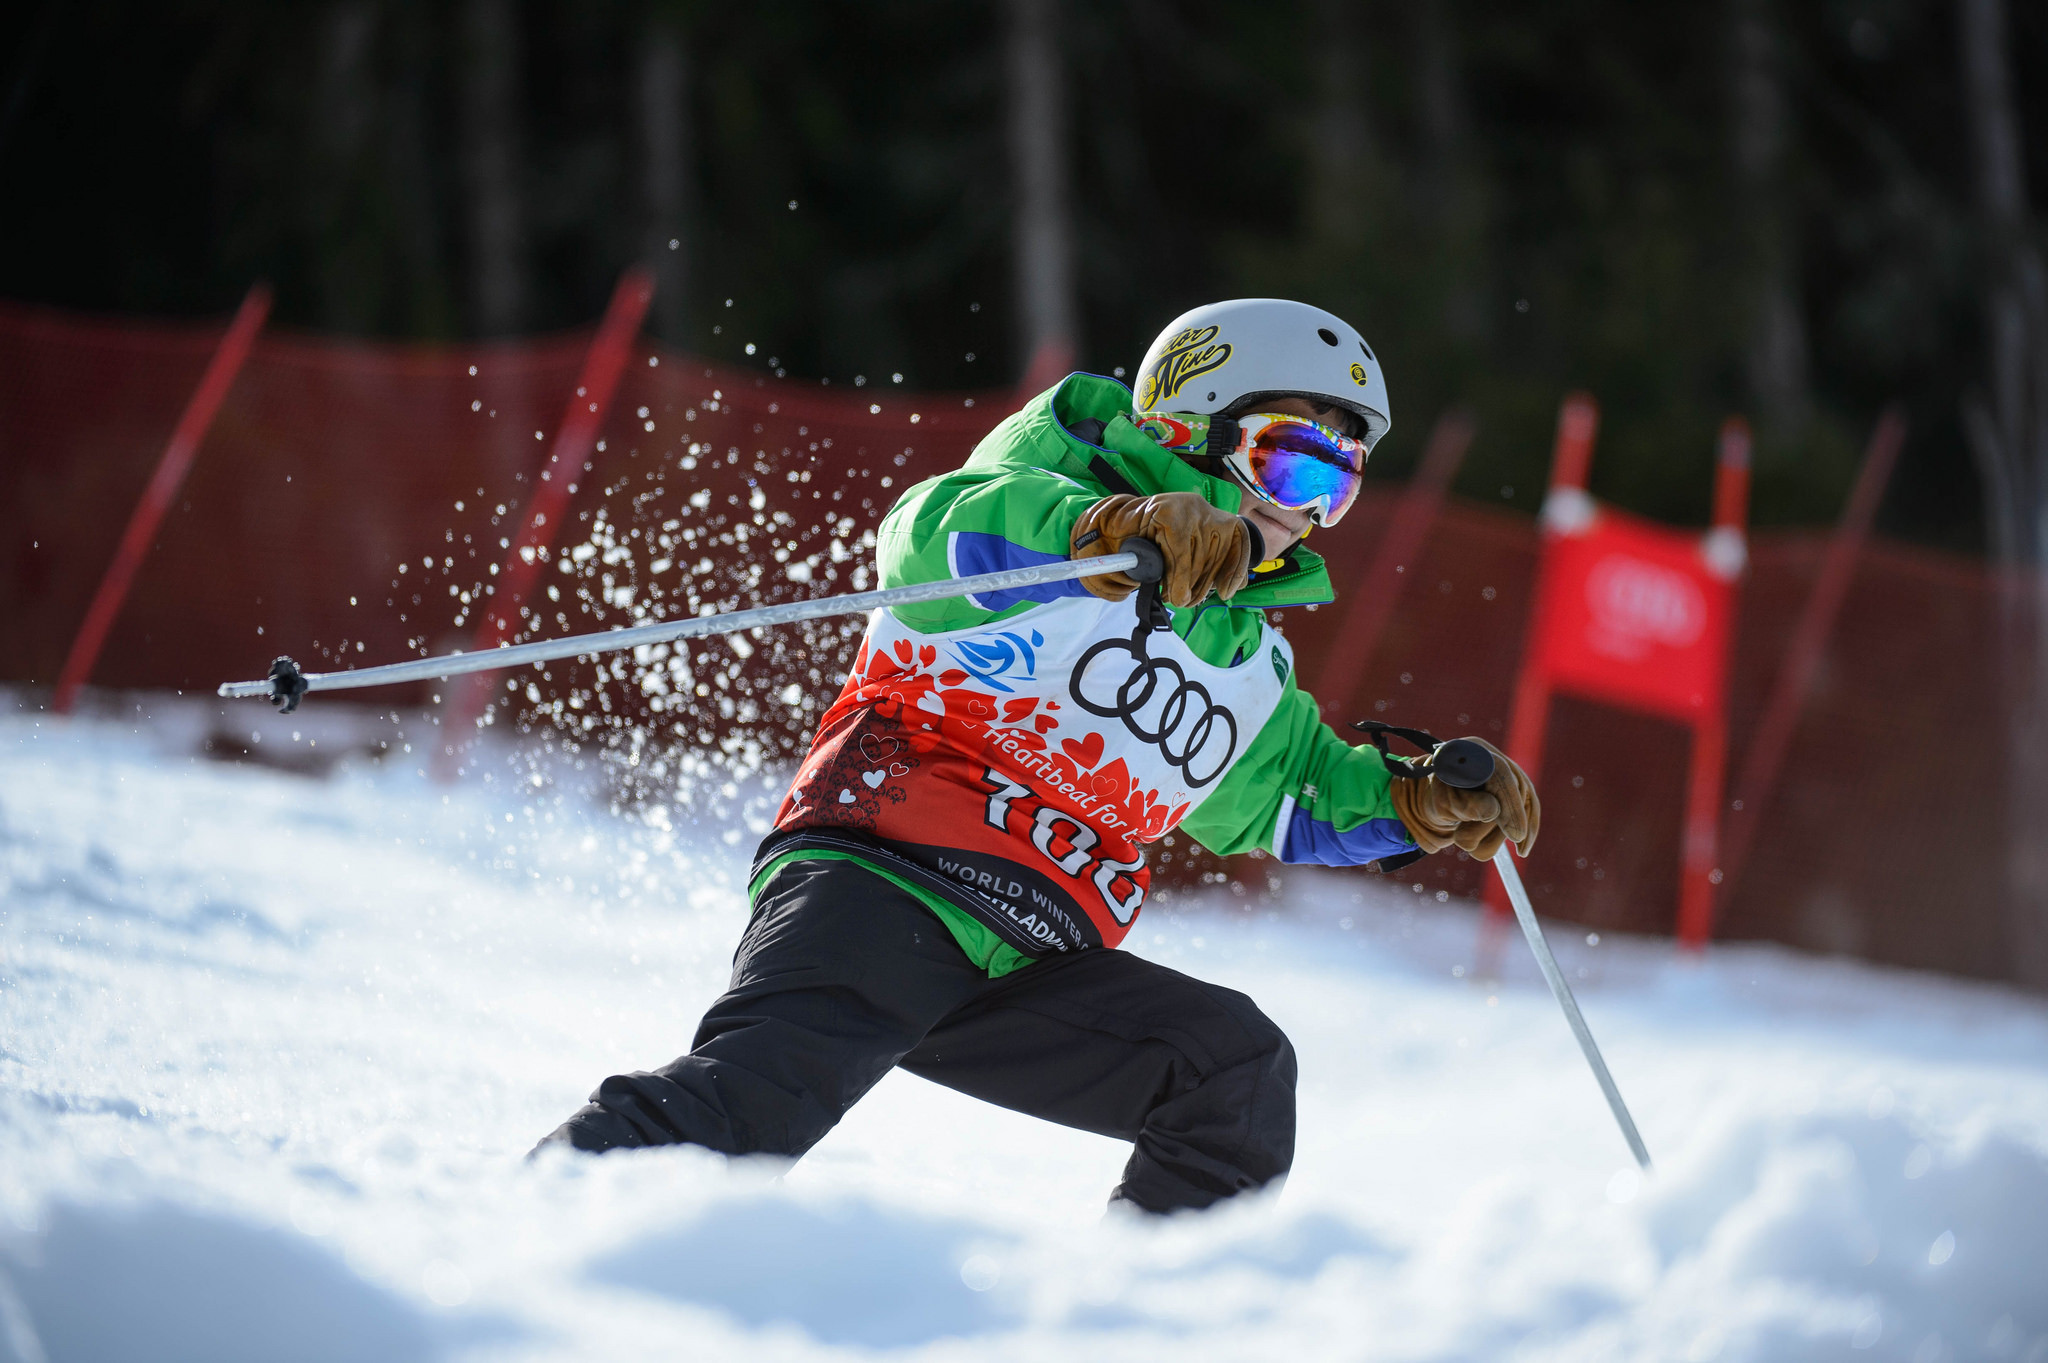 Sweden has been named as the host of the Special Olympics World Winter Games in 2021 ©Special Olympics